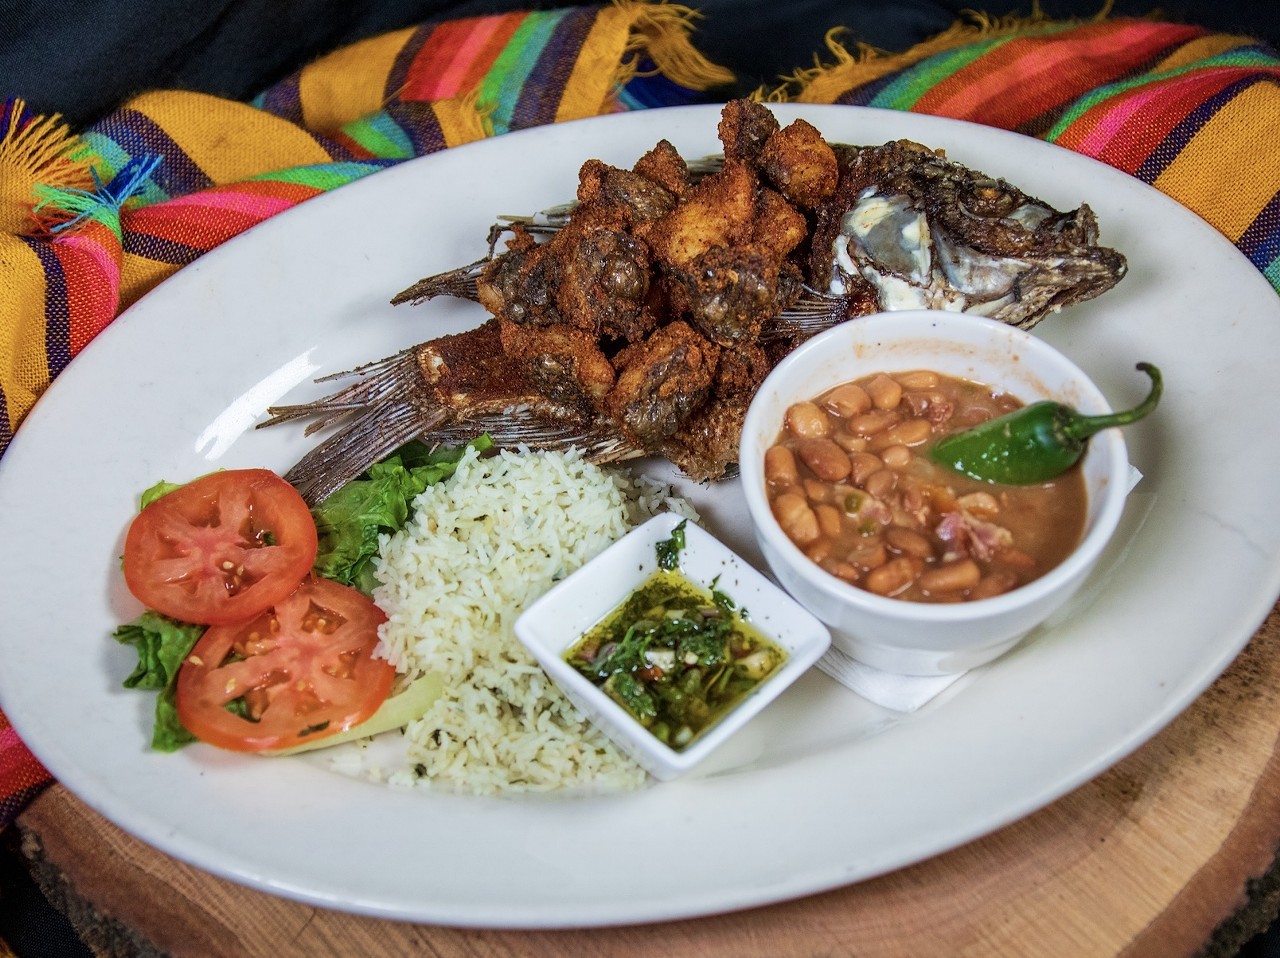 Try out a newly opened restaurant
Refresh your palate with daring new dishes at one of SA’s hip new eateries, like recent Stone Oak addition Arenas Marisqueria. Not sure what’s new on the scene? Check out our list of recently opened establishments in town.